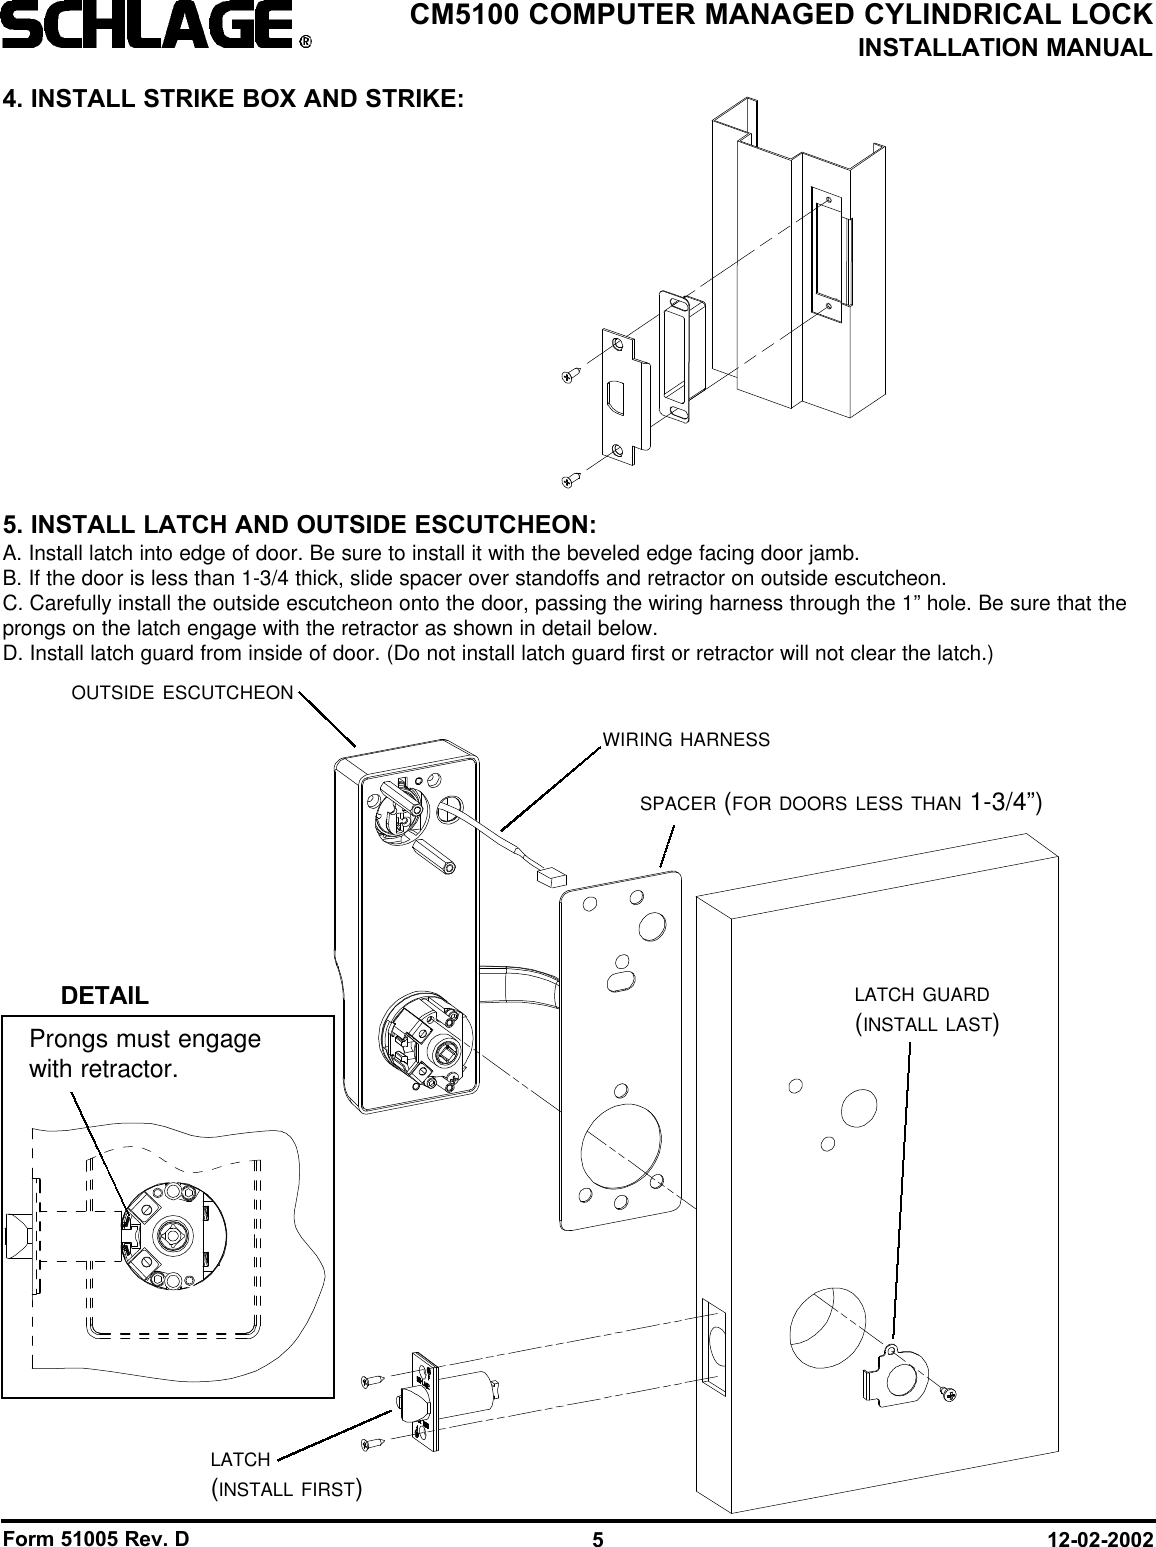 Form 51005 Rev. D 12-02-20025CM5100 COMPUTER MANAGED CYLINDRICAL LOCKINSTALLATION MANUALSPACER (FOR DOORS LESS THAN 1-3/4”)OUTSIDE ESCUTCHEONLATCH(INSTALL FIRST)LATCH GUARD(INSTALL LAST)WIRING HARNESS4. INSTALL STRIKE BOX AND STRIKE:5. INSTALL LATCH AND OUTSIDE ESCUTCHEON:A. Install latch into edge of door. Be sure to install it with the beveled edge facing door jamb.B. If the door is less than 1-3/4 thick, slide spacer over standoffs and retractor on outside escutcheon.C. Carefully install the outside escutcheon onto the door, passing the wiring harness through the 1” hole. Be sure that theprongs on the latch engage with the retractor as shown in detail below.D. Install latch guard from inside of door. (Do not install latch guard first or retractor will not clear the latch.)DETAILProngs must engagewith retractor.